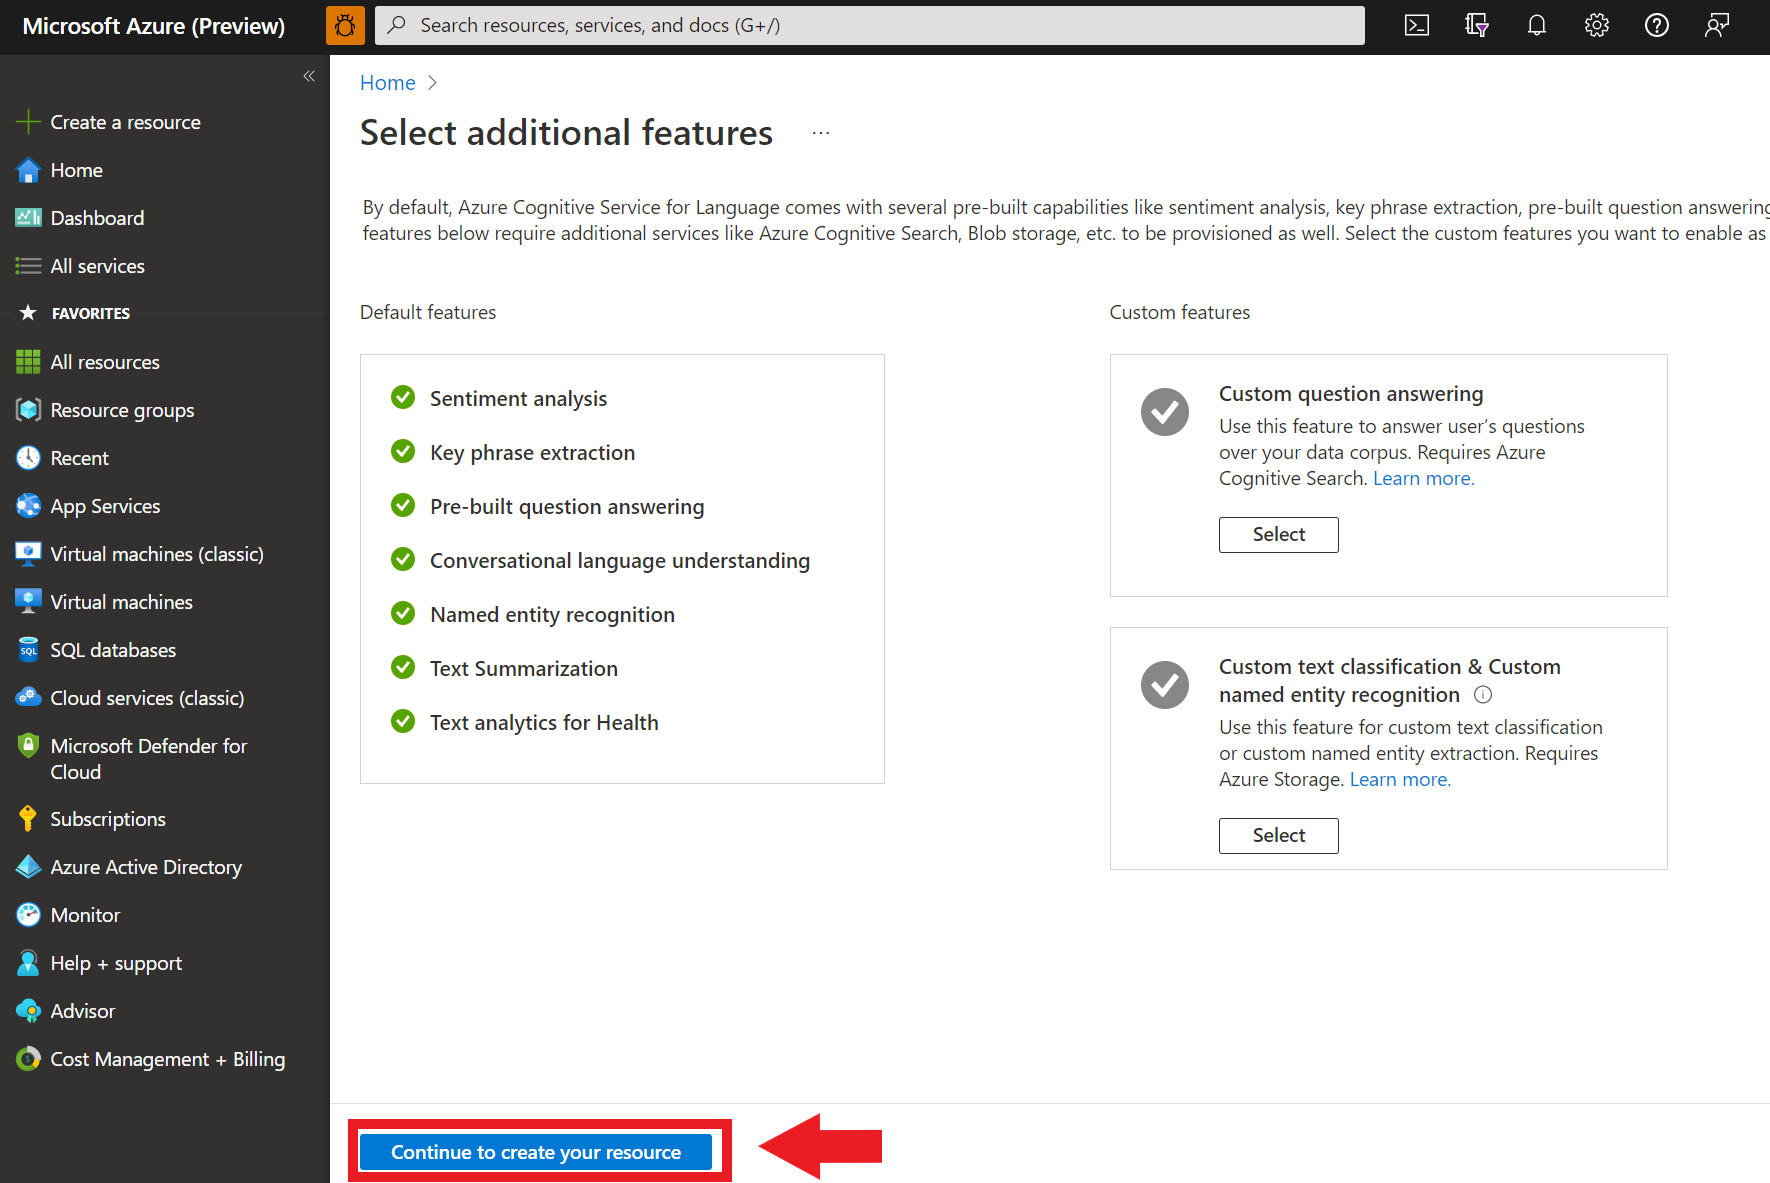 A screenshot showing additional feature options in the Azure portal.